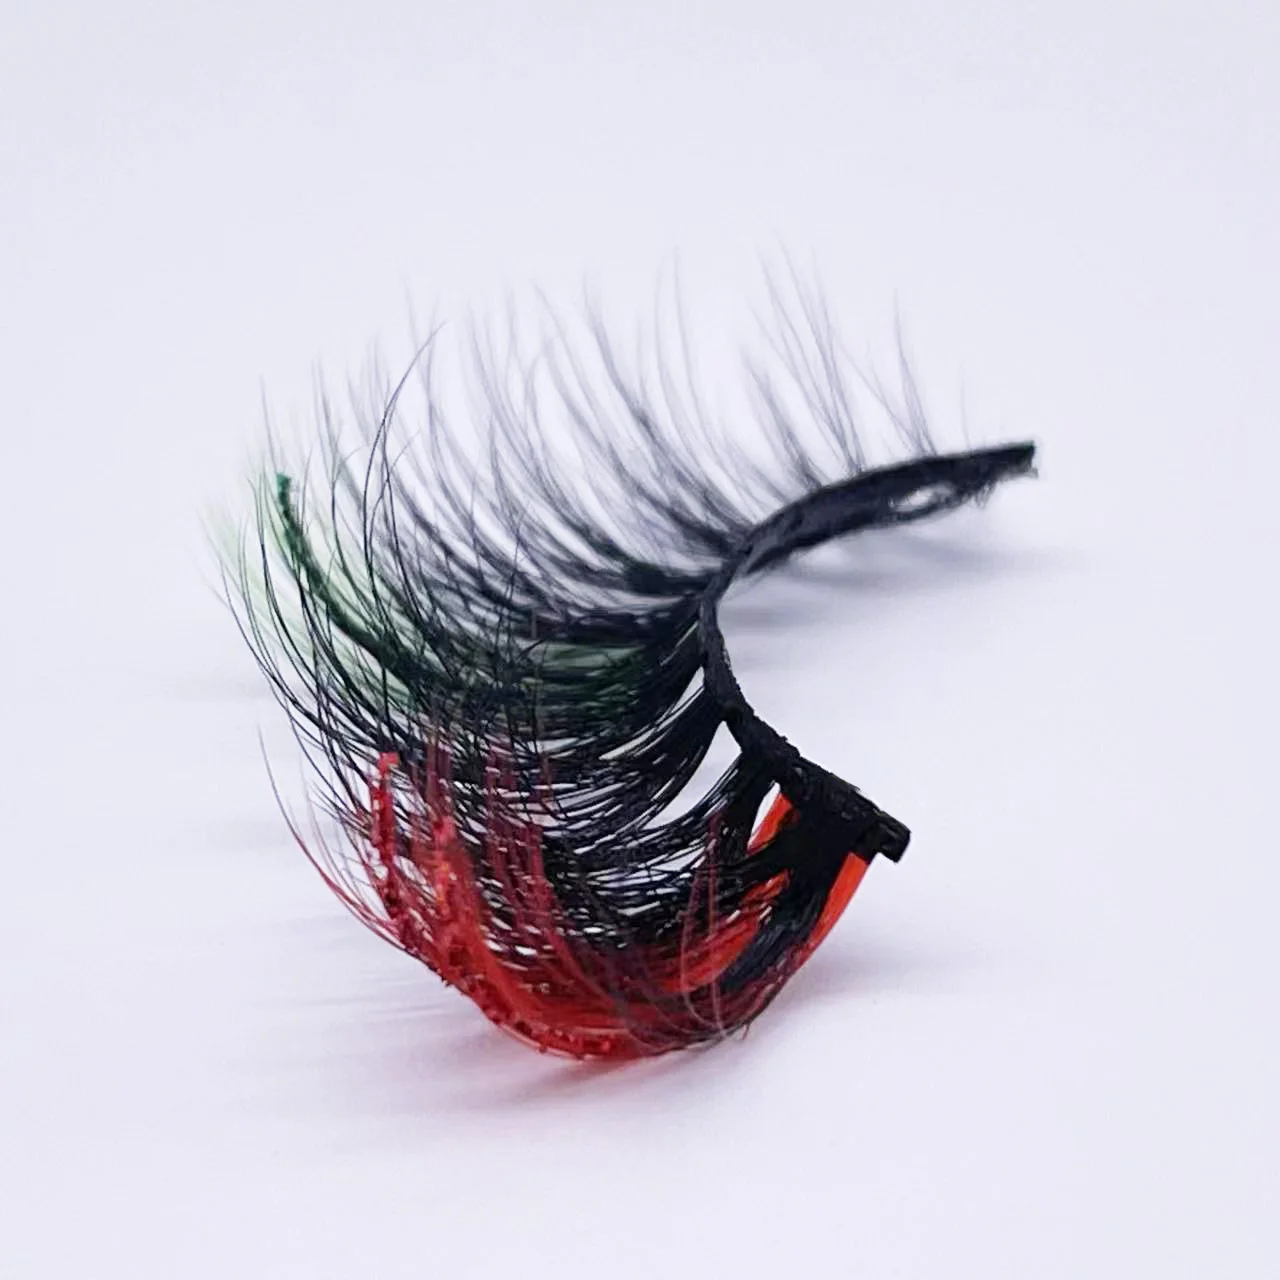 Hbzgtlad Colored Lashes Glitter Mink 15mm -20mm Fluffy Color Streaks Cosplay Makeup Beauty Eyelashes -Outlet Maid Outfit Store Sb630a31bc30f46119ab68af411db591aP.jpg